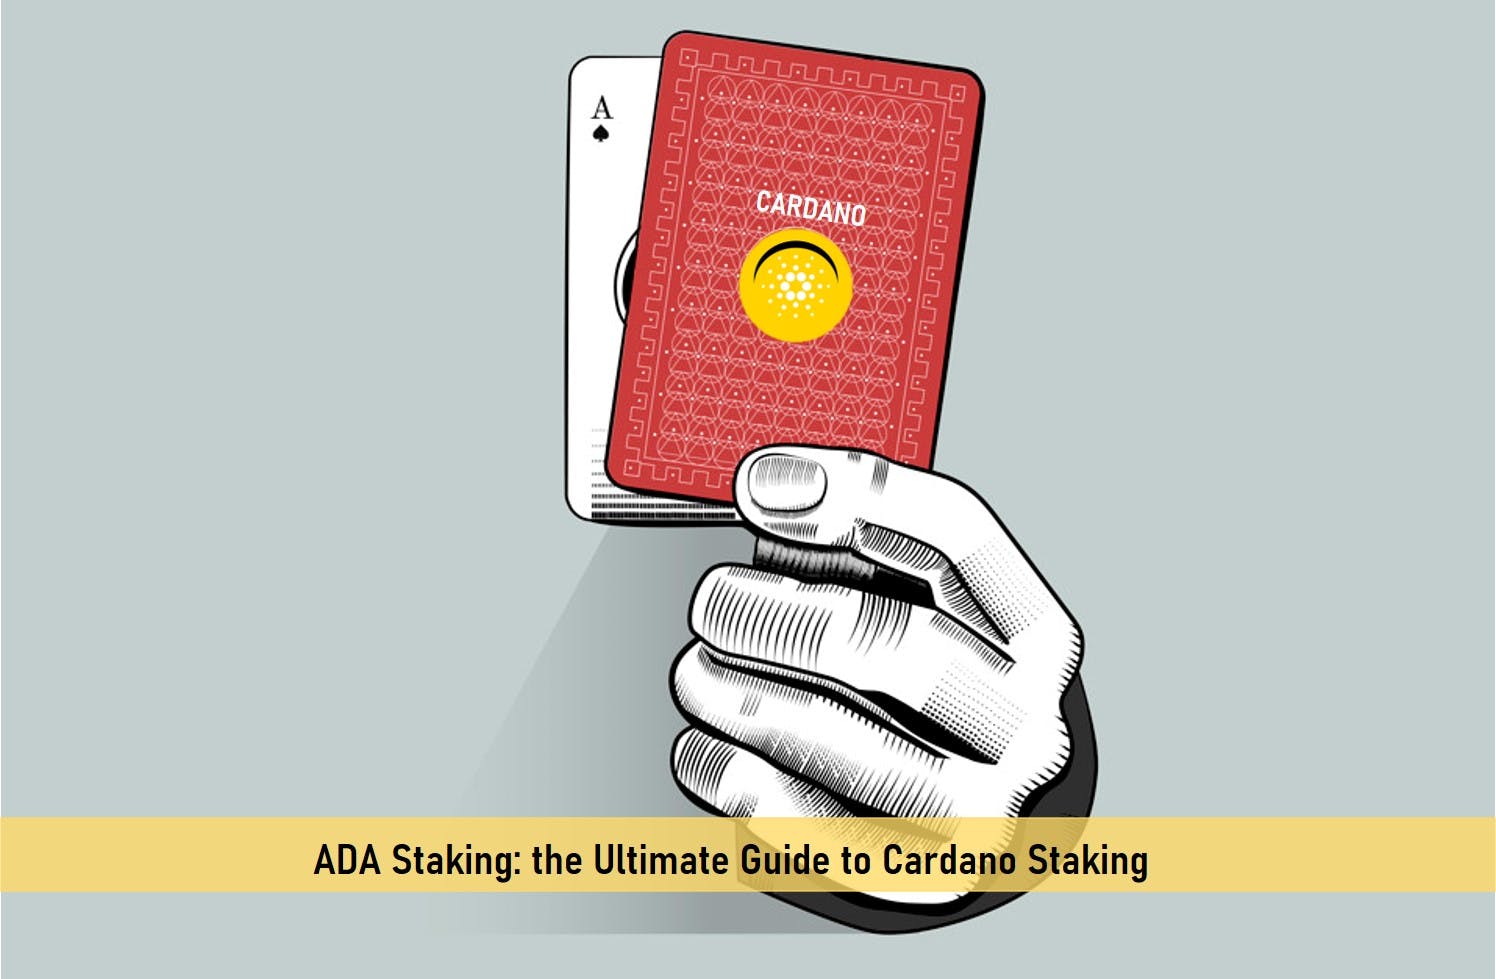 ADA Staking: the Ultimate Guide to Cardano Staking